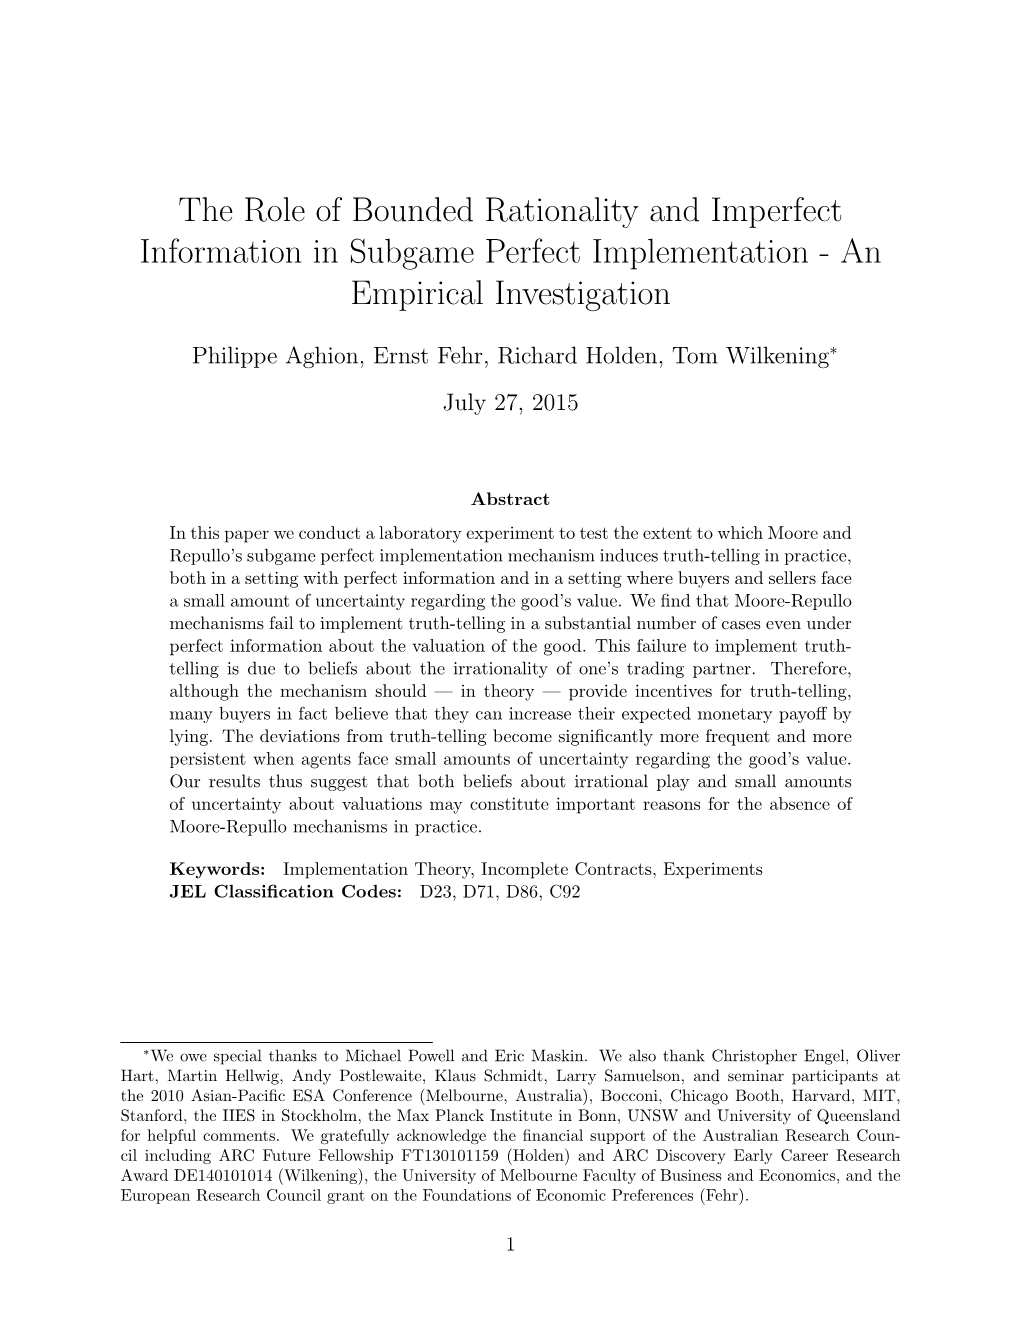 The Role of Bounded Rationality and Imperfect Information in Subgame Perfect Implementation - an Empirical Investigation